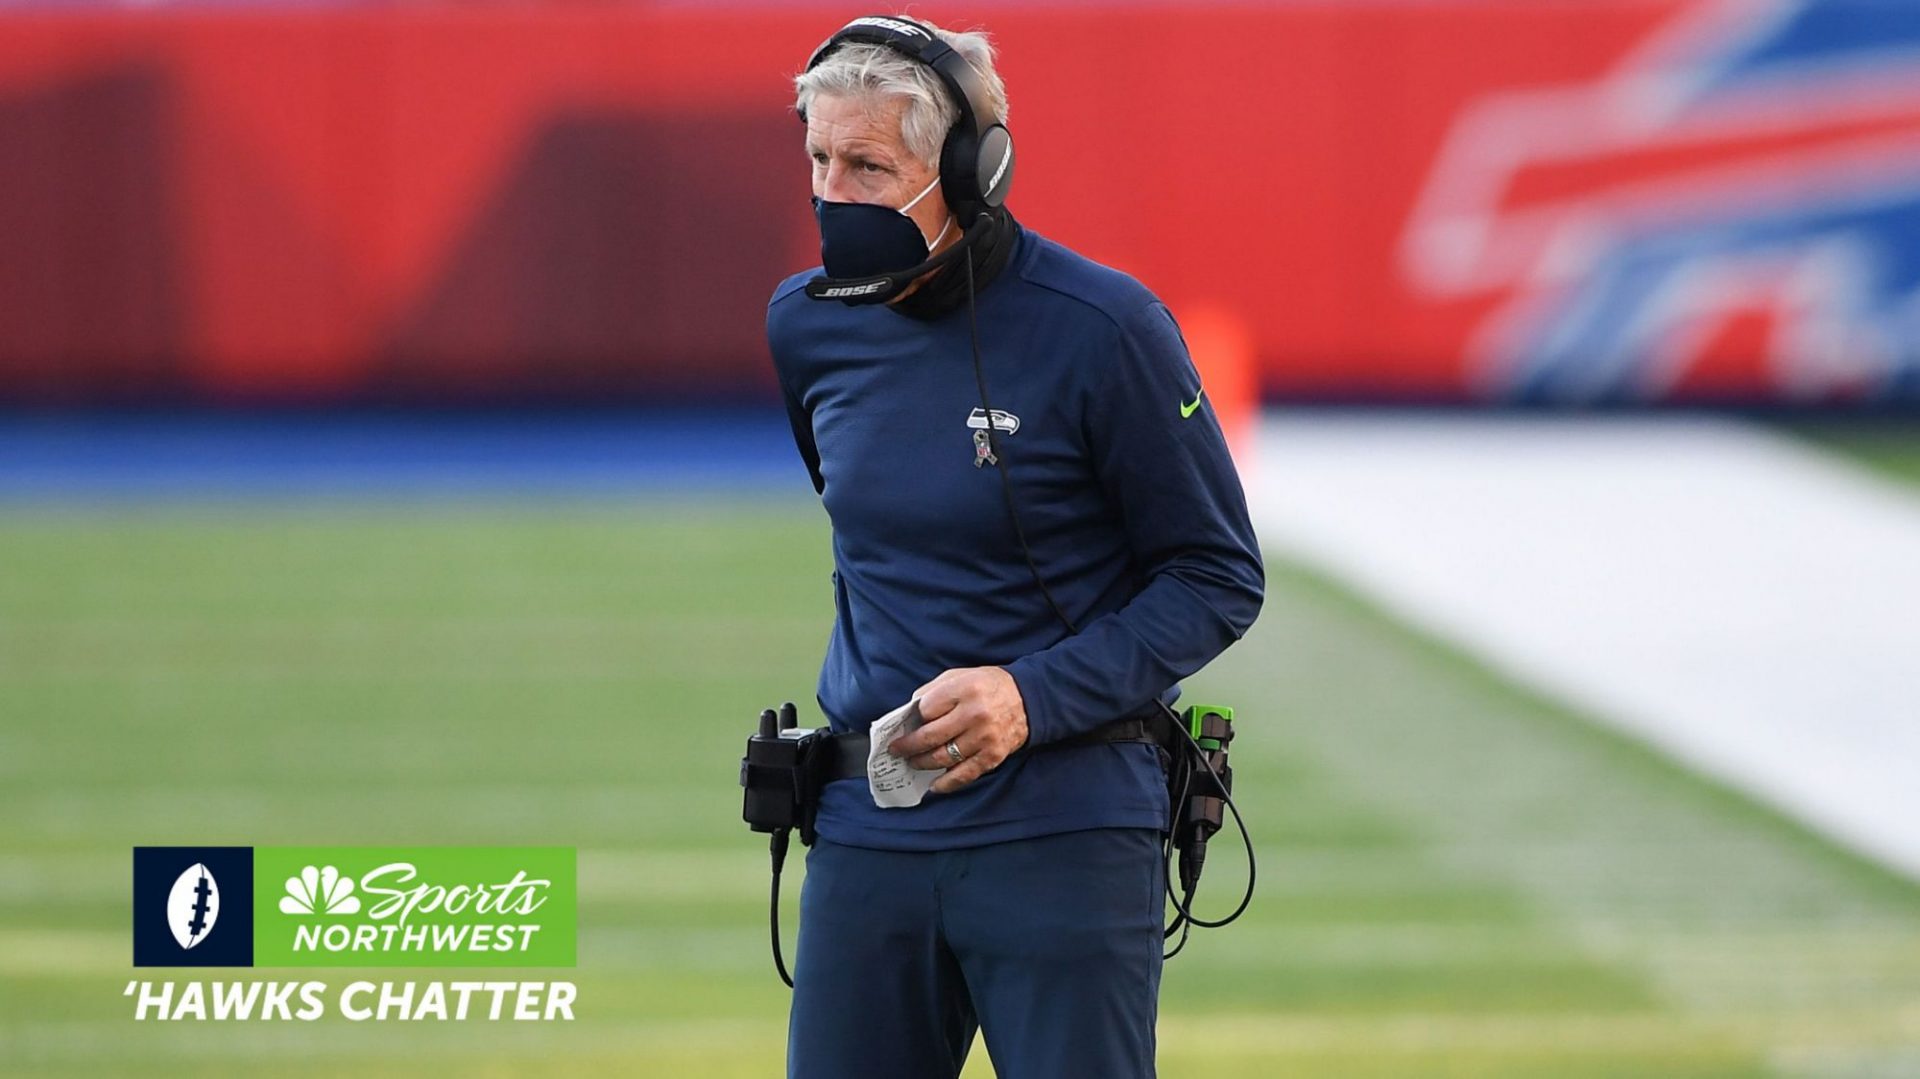 Pete Carroll takes responsibility for lack of in-game adjustments on Seahawks defense